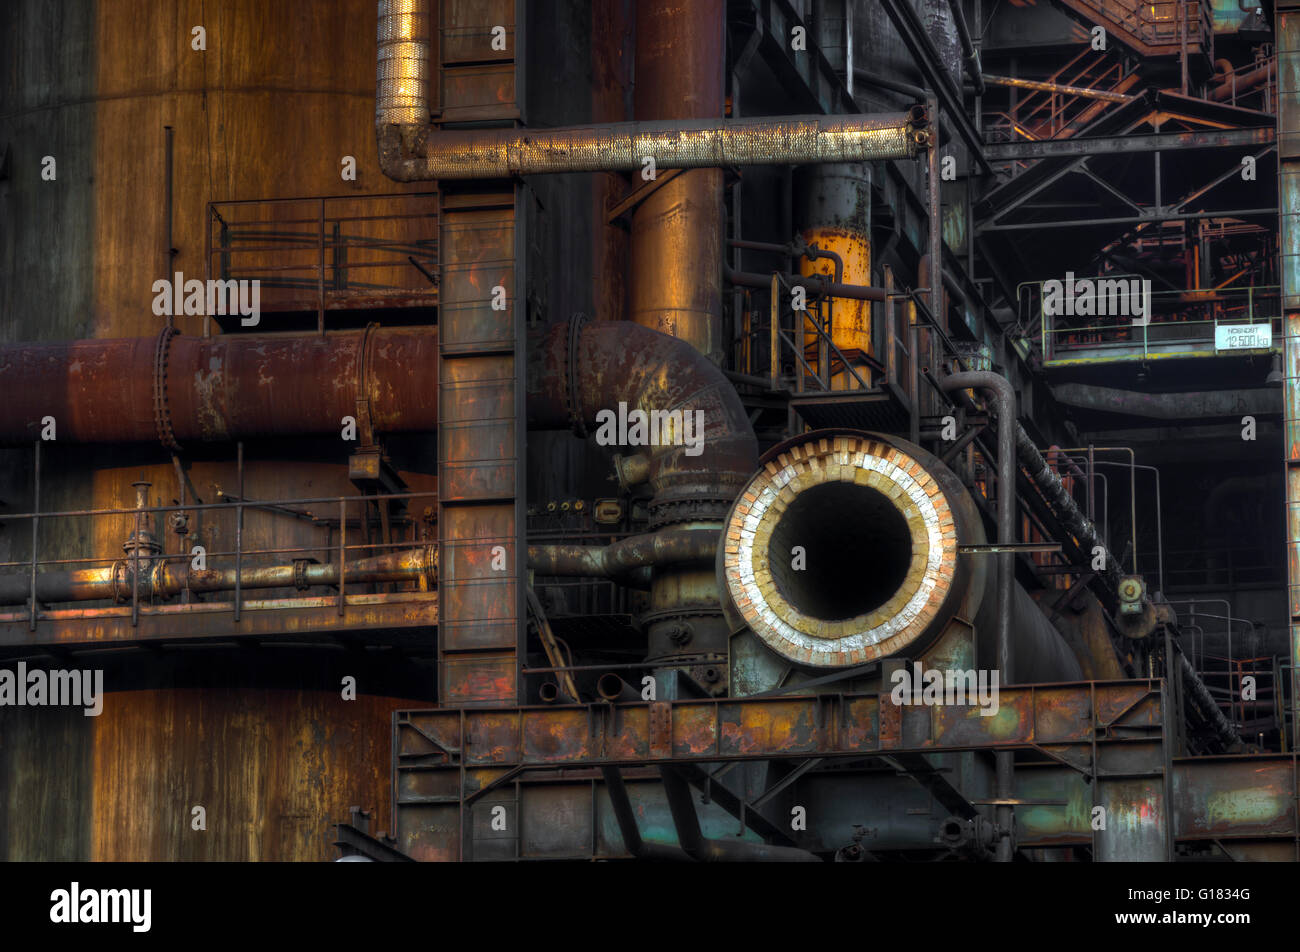 Coking plant, blast furnaces and the other technological facilities of metallurgical basic industry and energetics Stock Photo